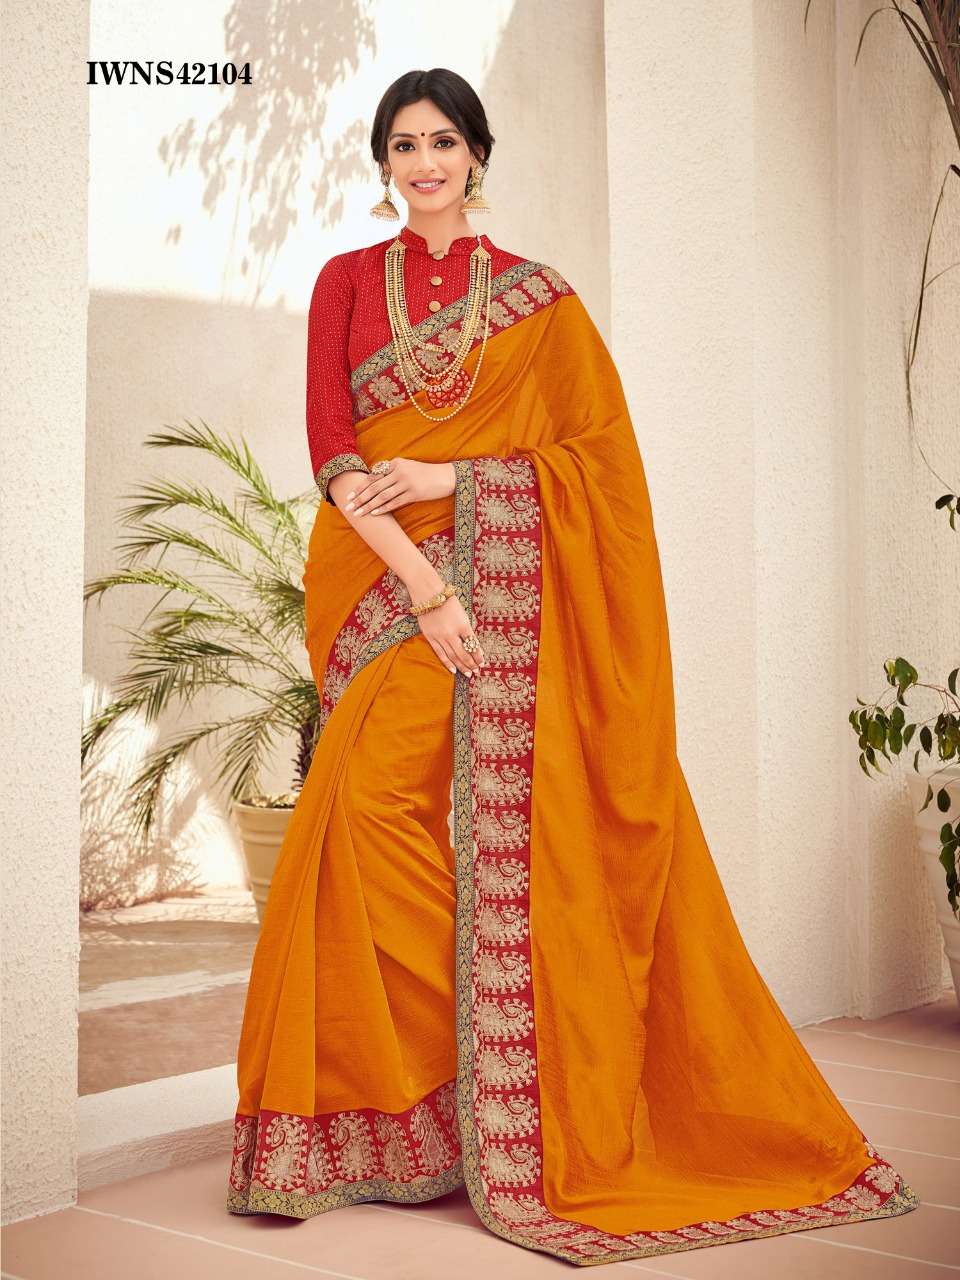 Offering The best quality Indian traditional dresses.